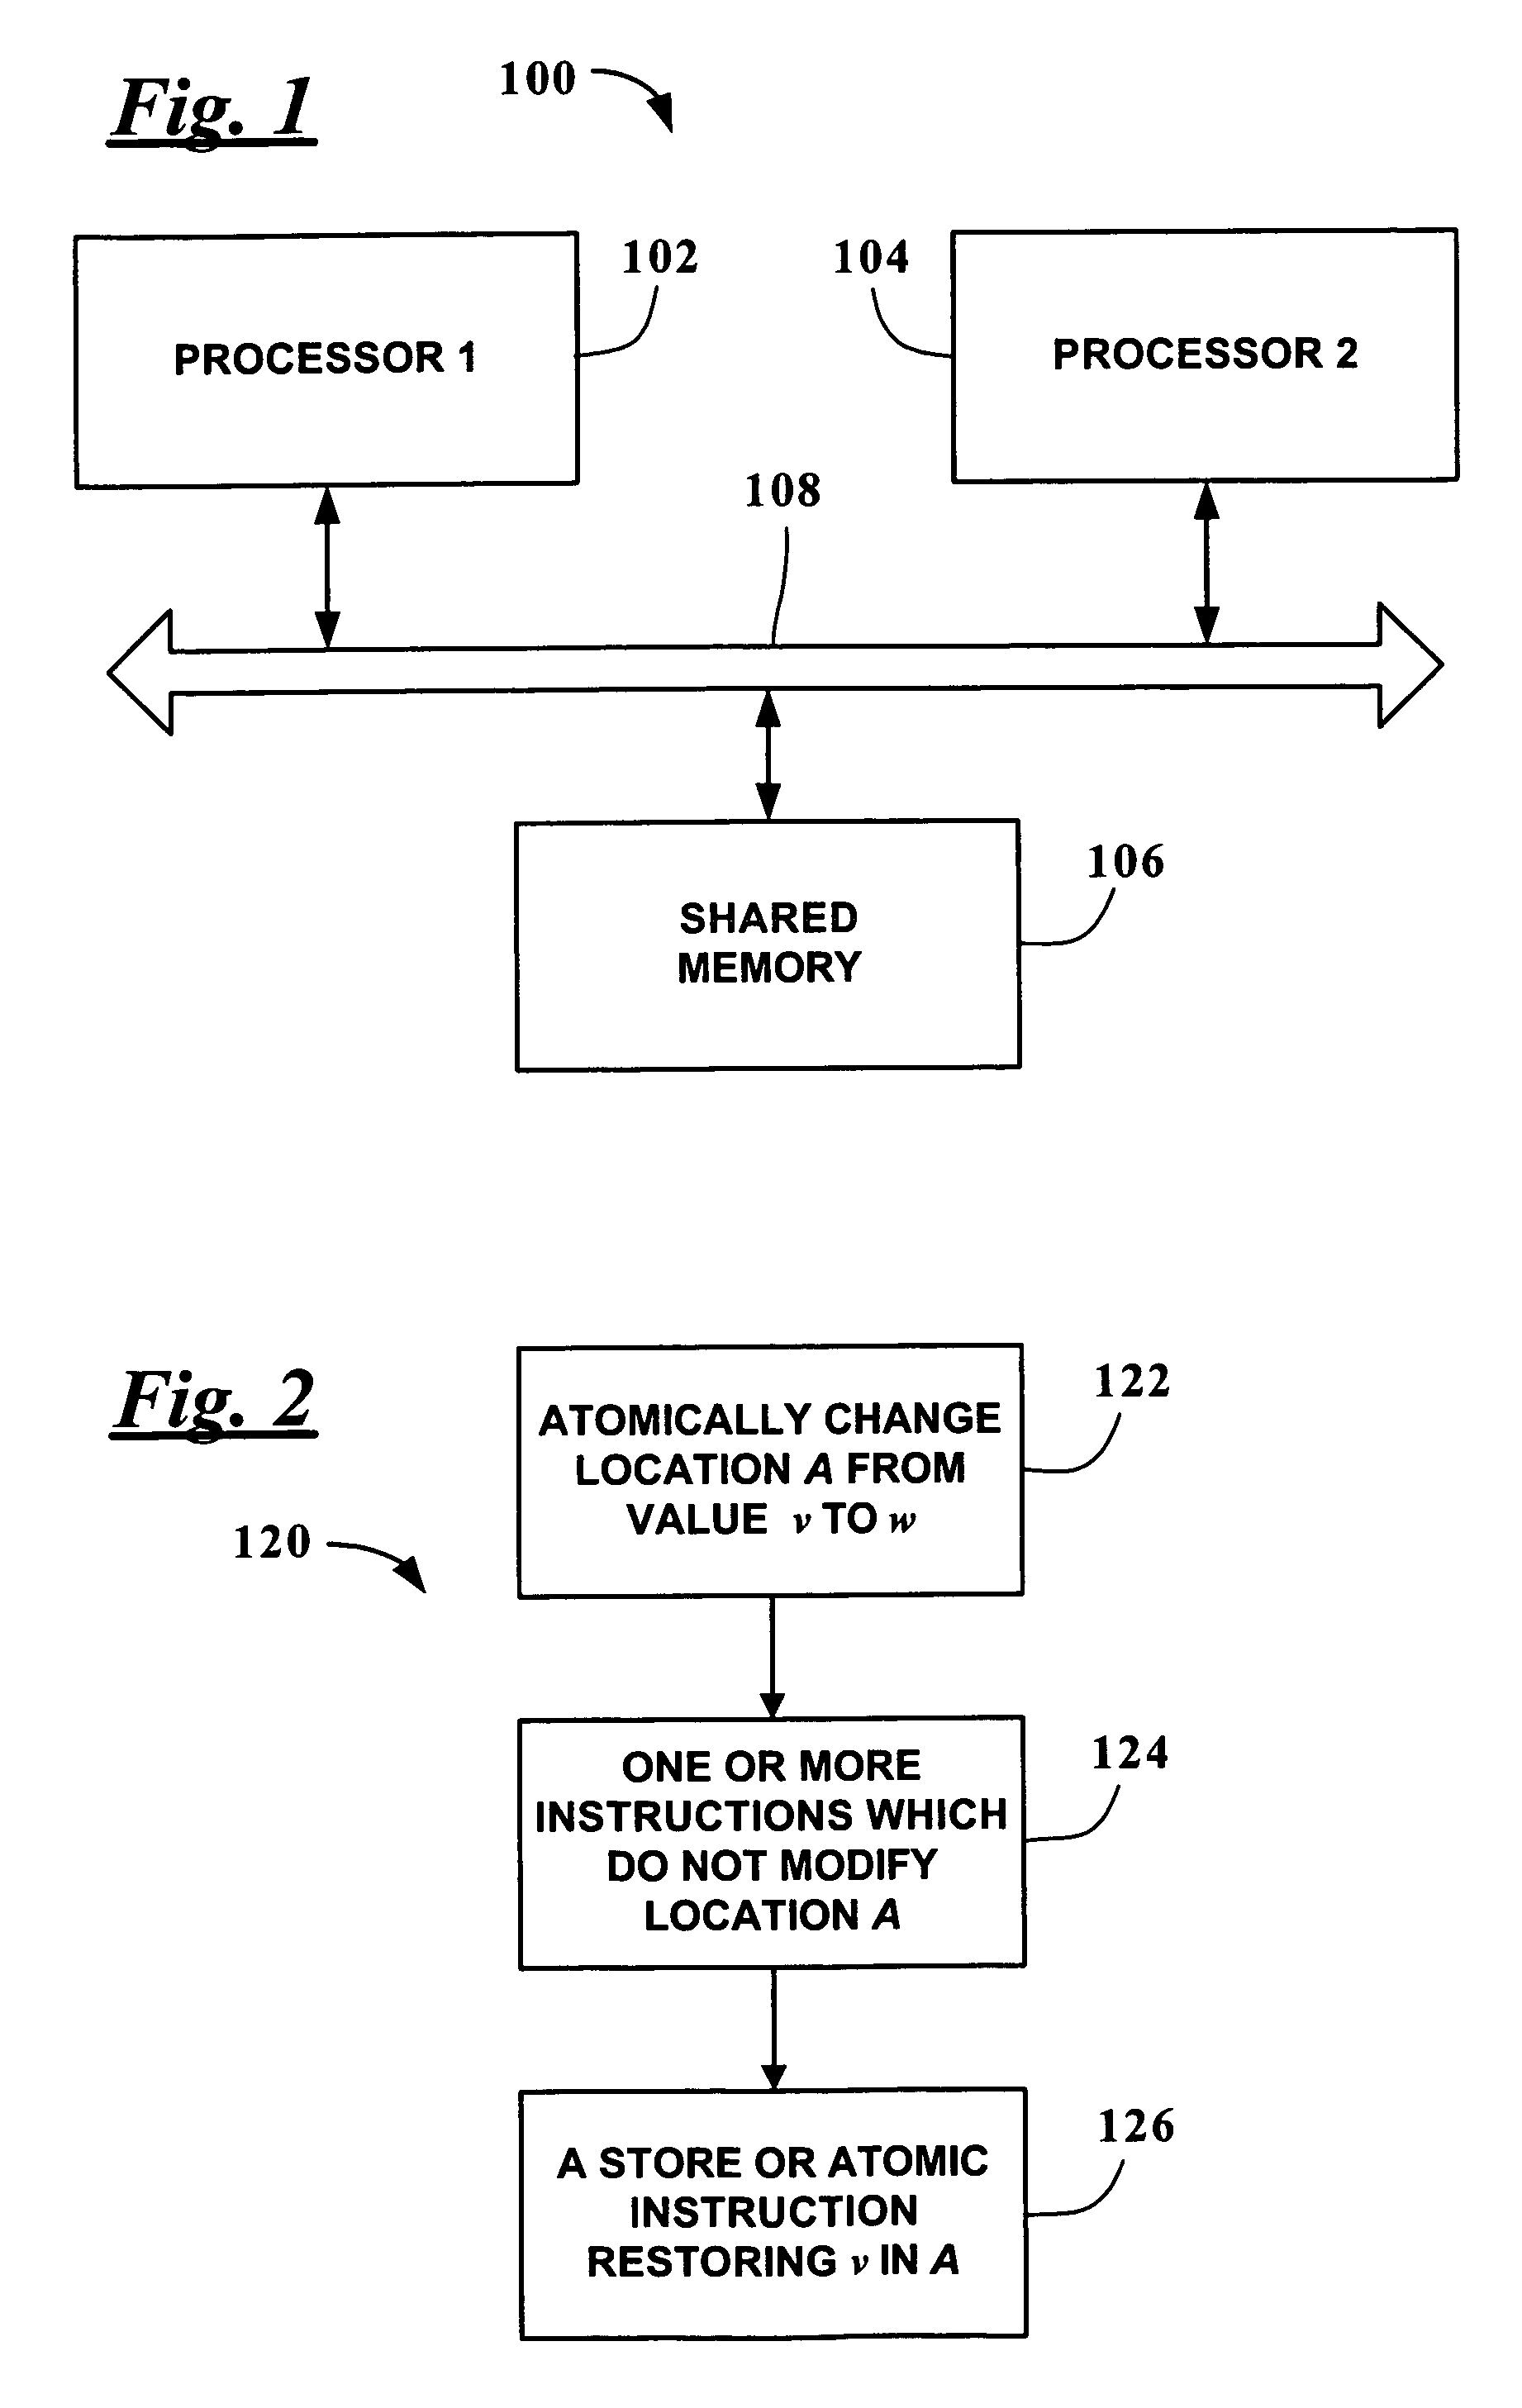 Method and apparatus for critical section prediction for intelligent lock elision